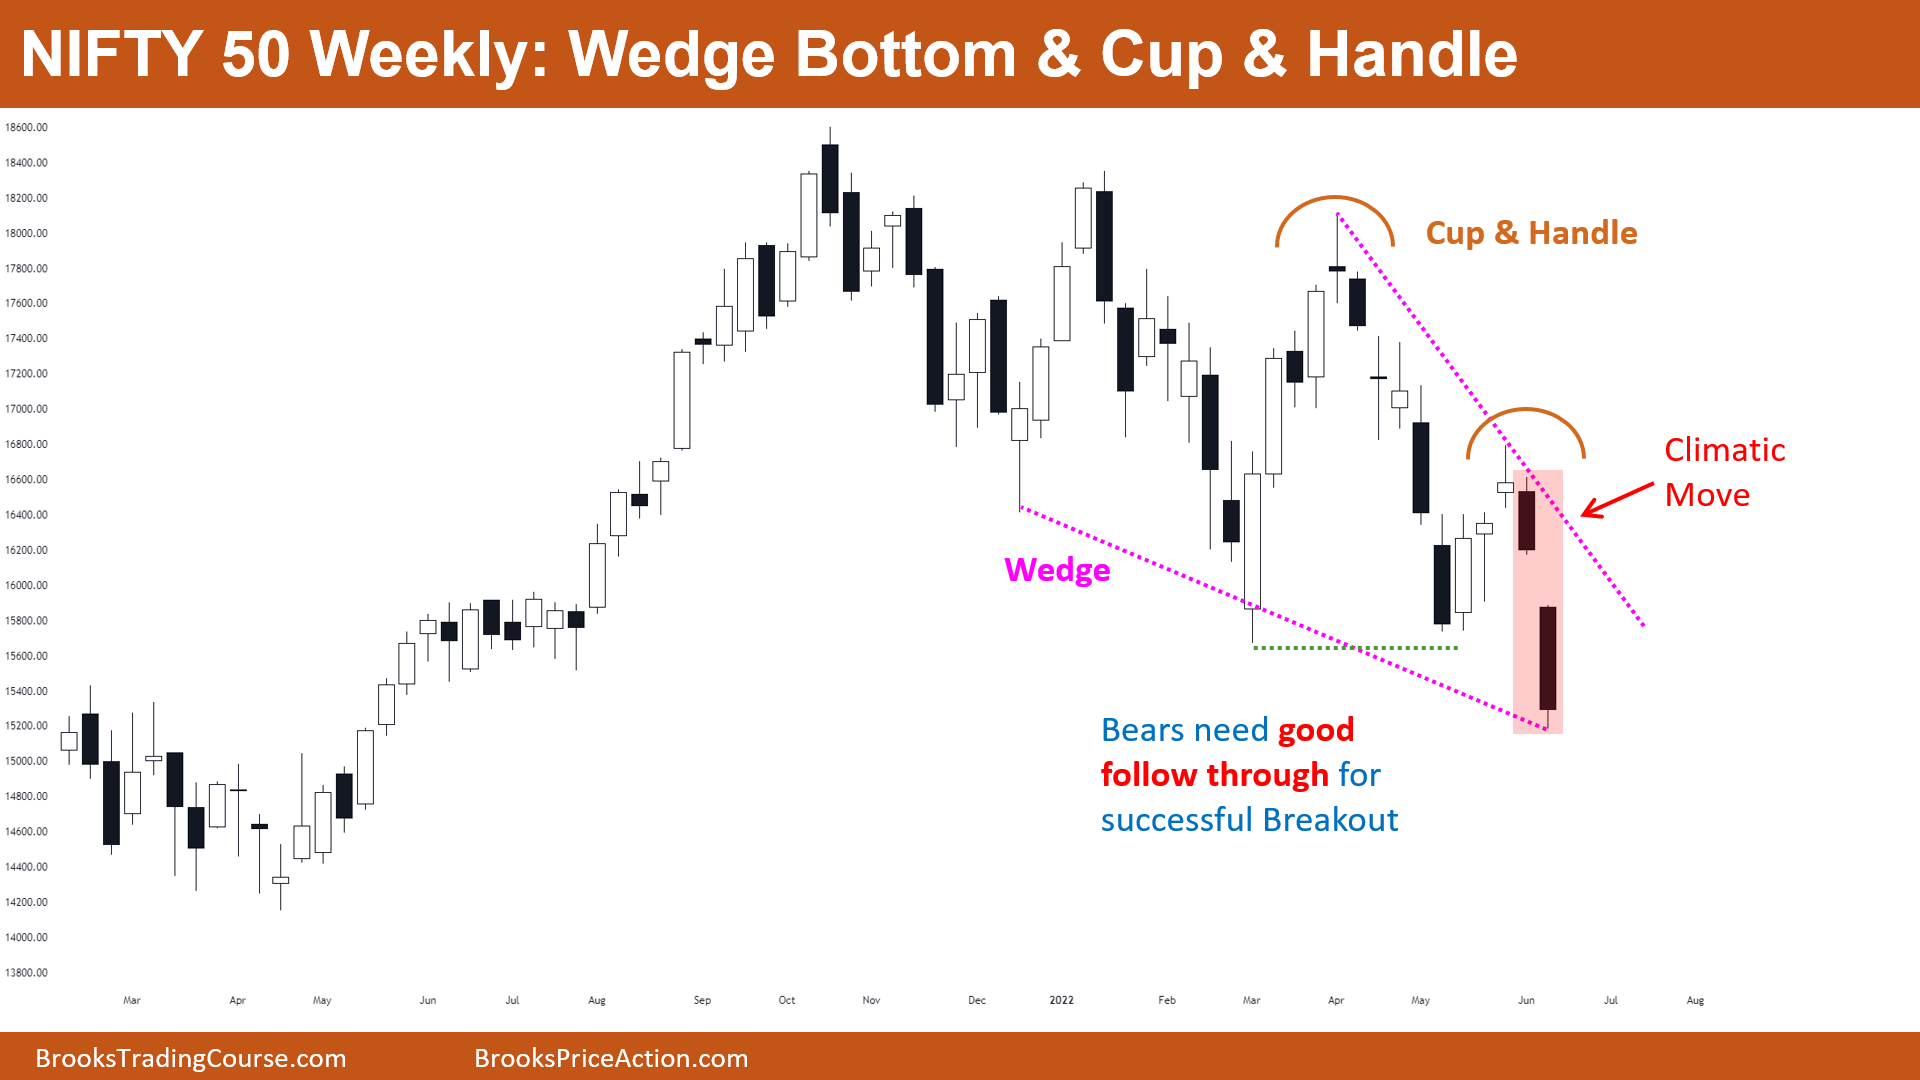 https://www.brookstradingcourse.com/wp-content/uploads/2022/06/Wedge-Bottom-Cup-Handle.png